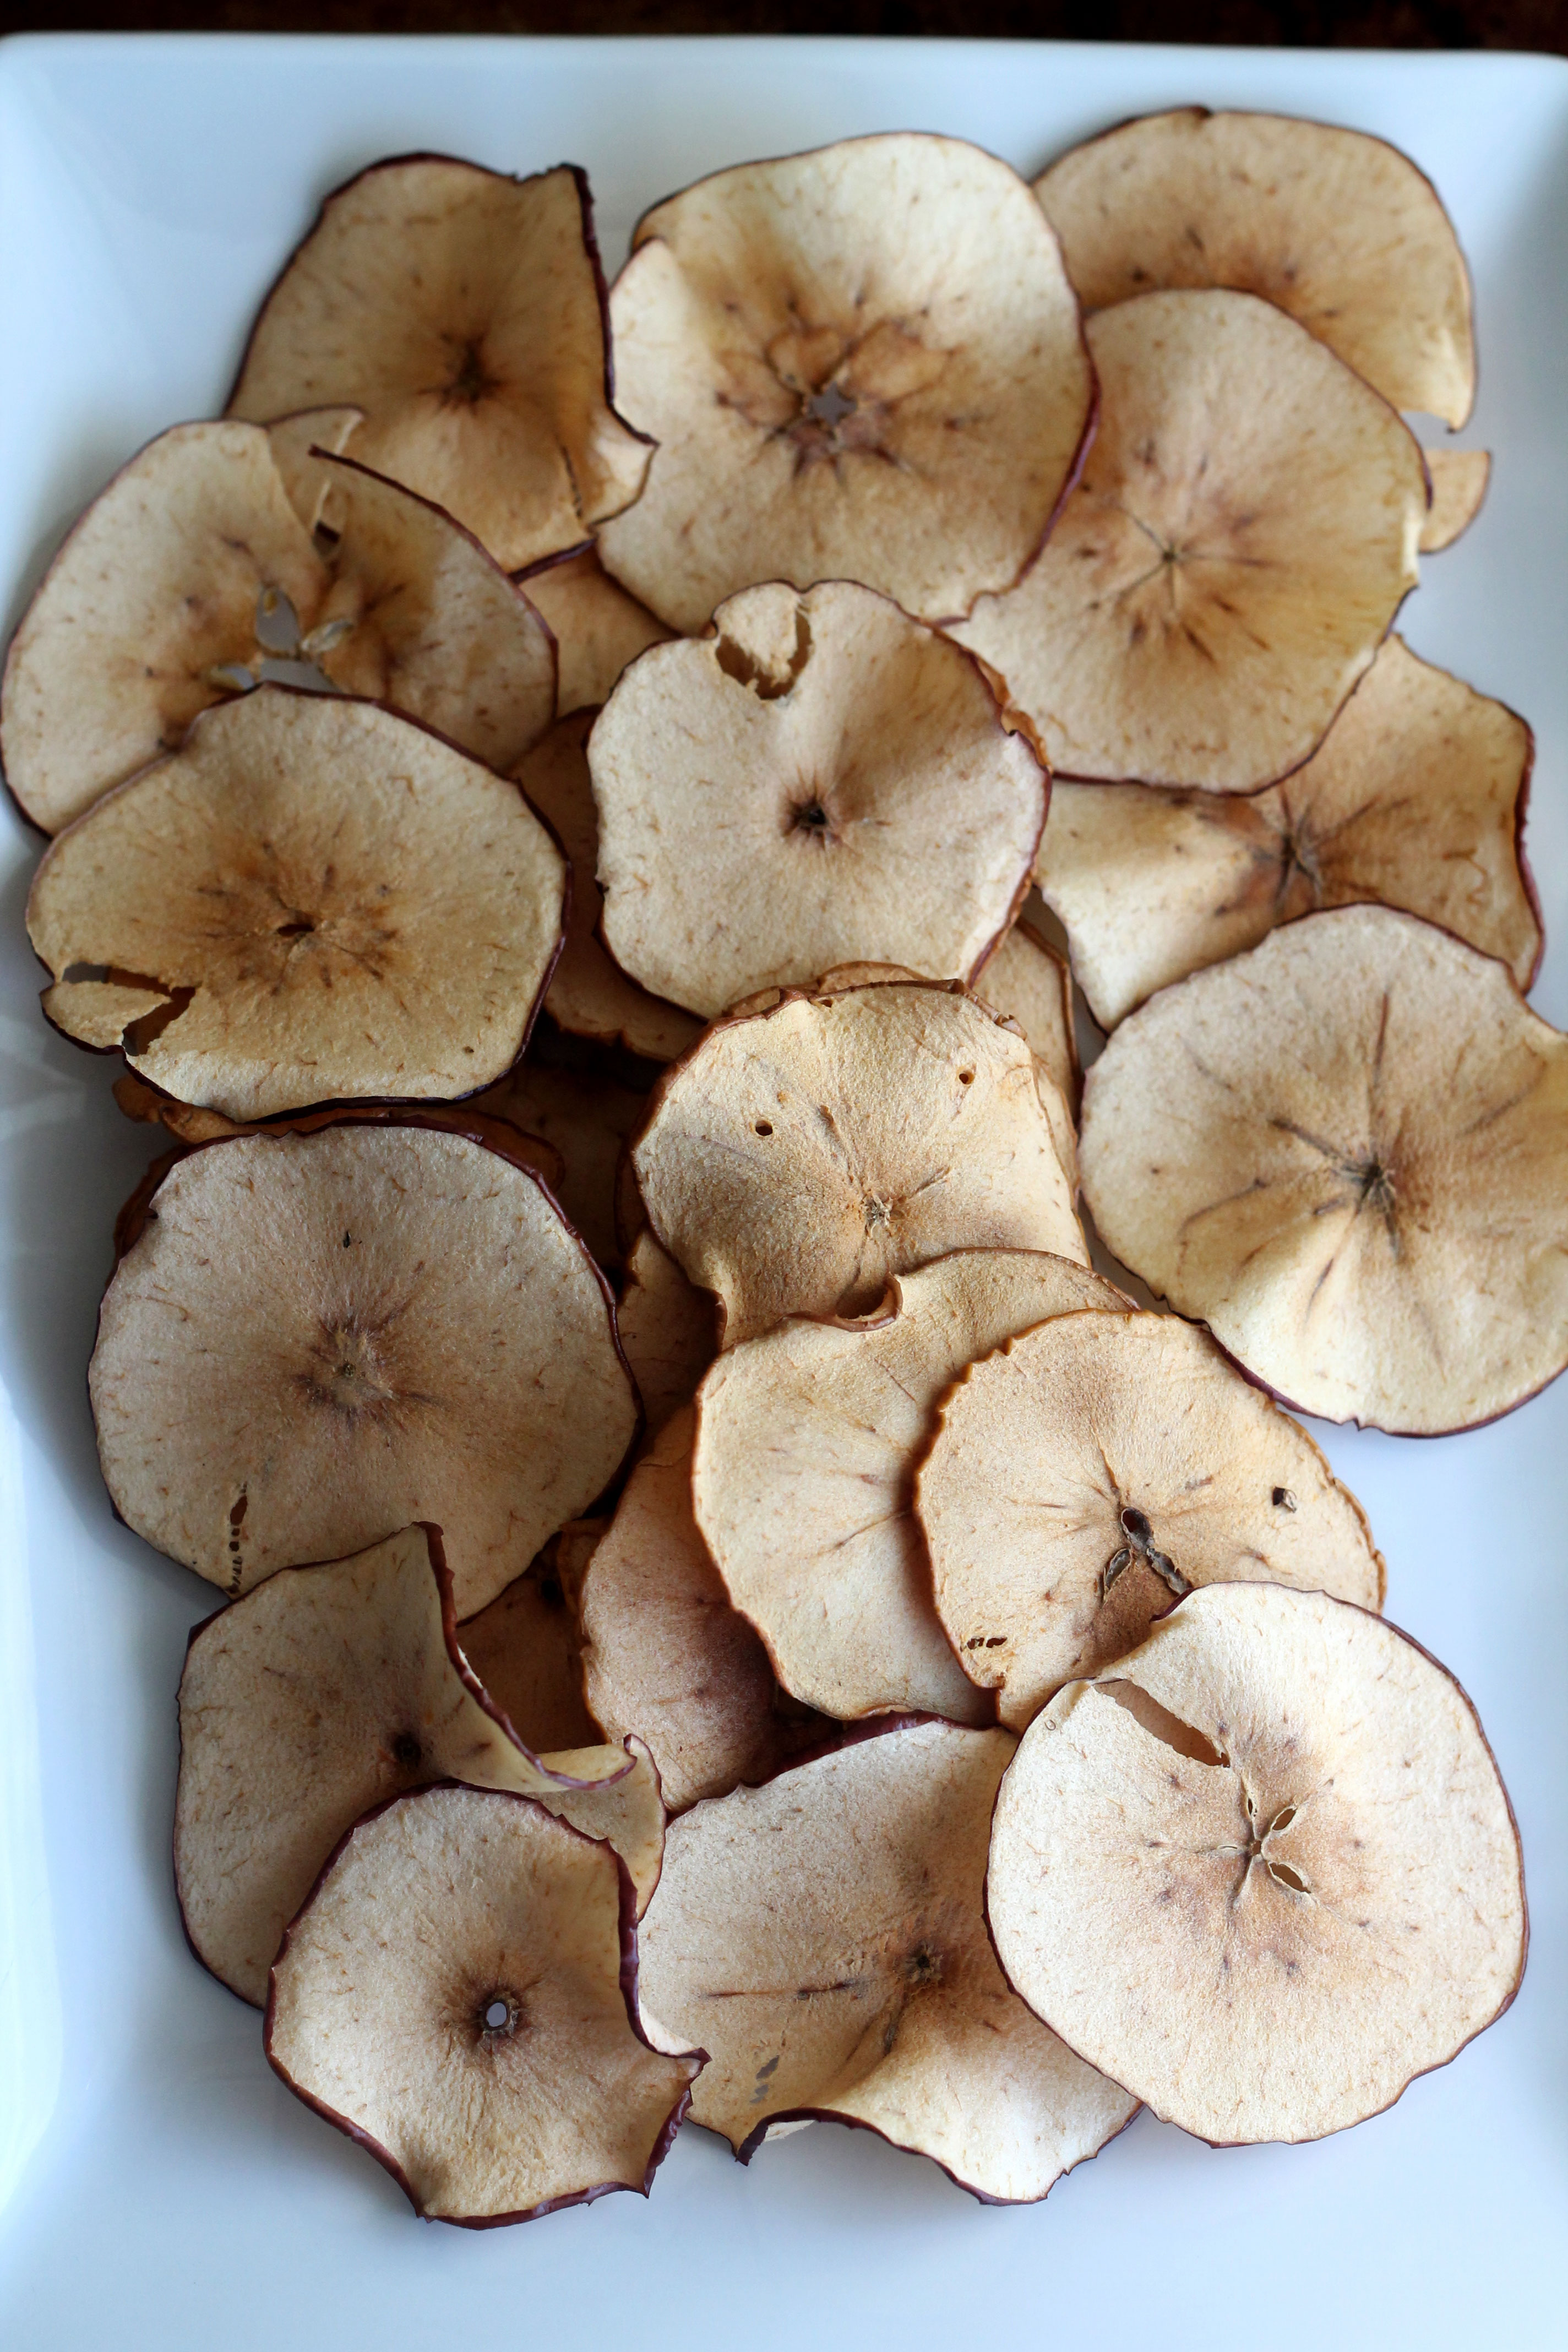 Need a new fall snack? Try these easy baked apple chips!